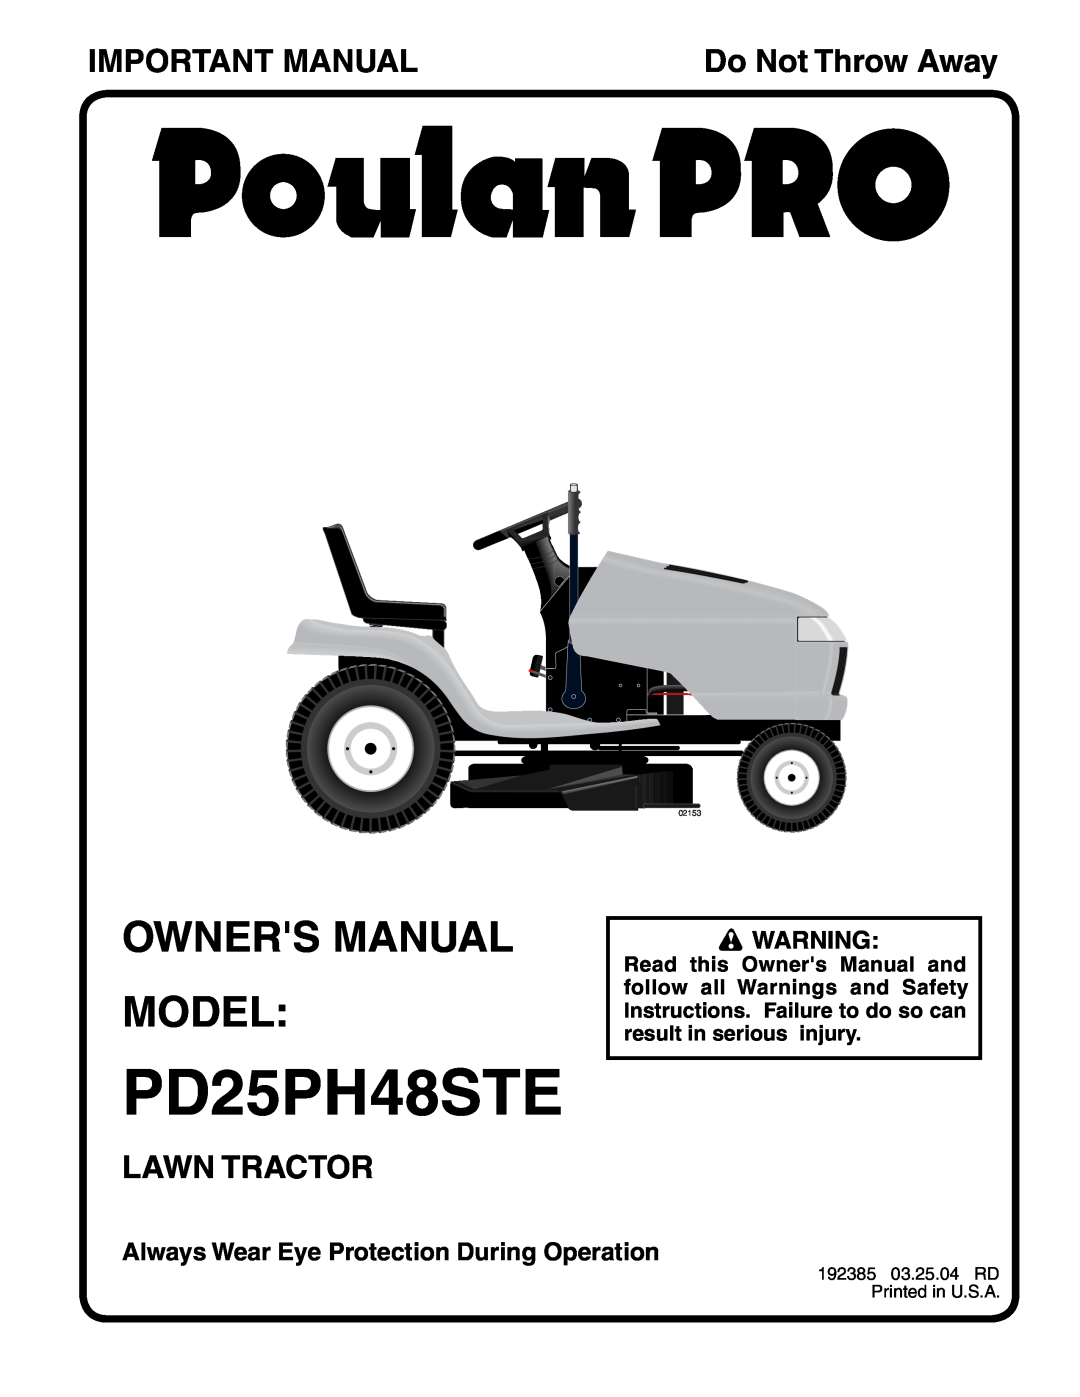 Poulan PD25PH48STE owner manual Important Manual, Lawn Tractor, Always Wear Eye Protection During Operation, 02153 